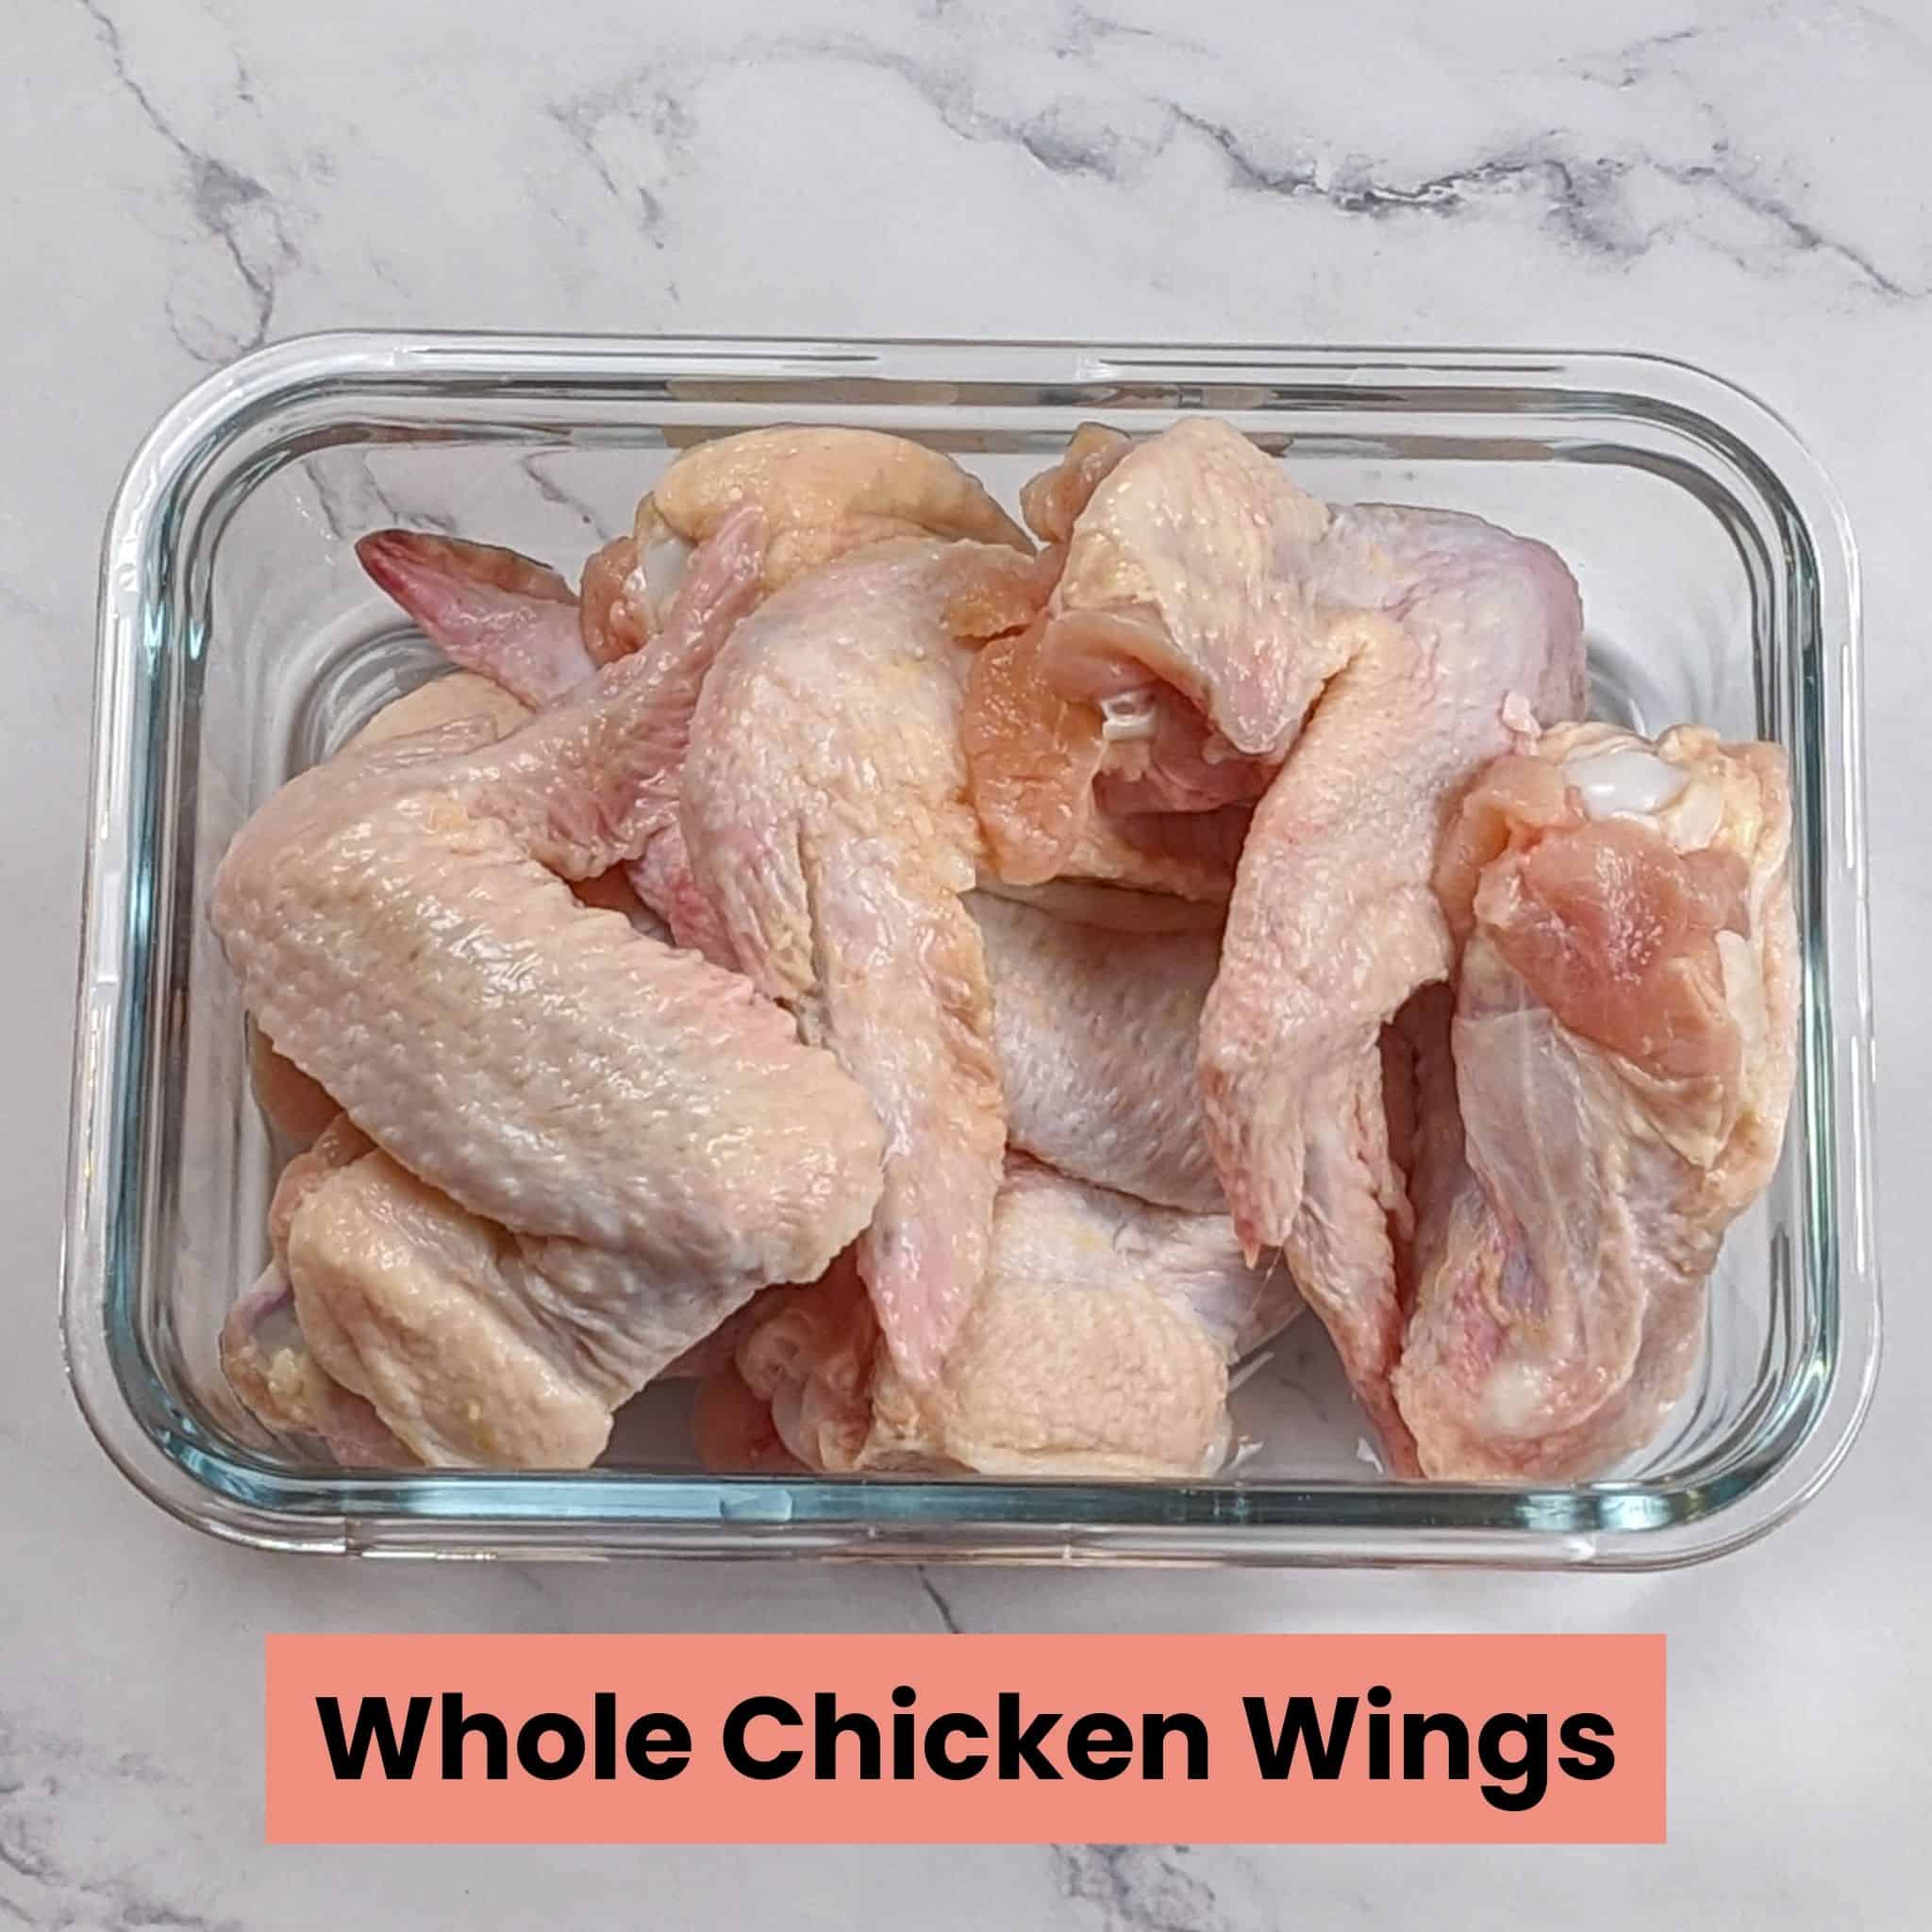 raw whole chicken wings in a glass rectangle container